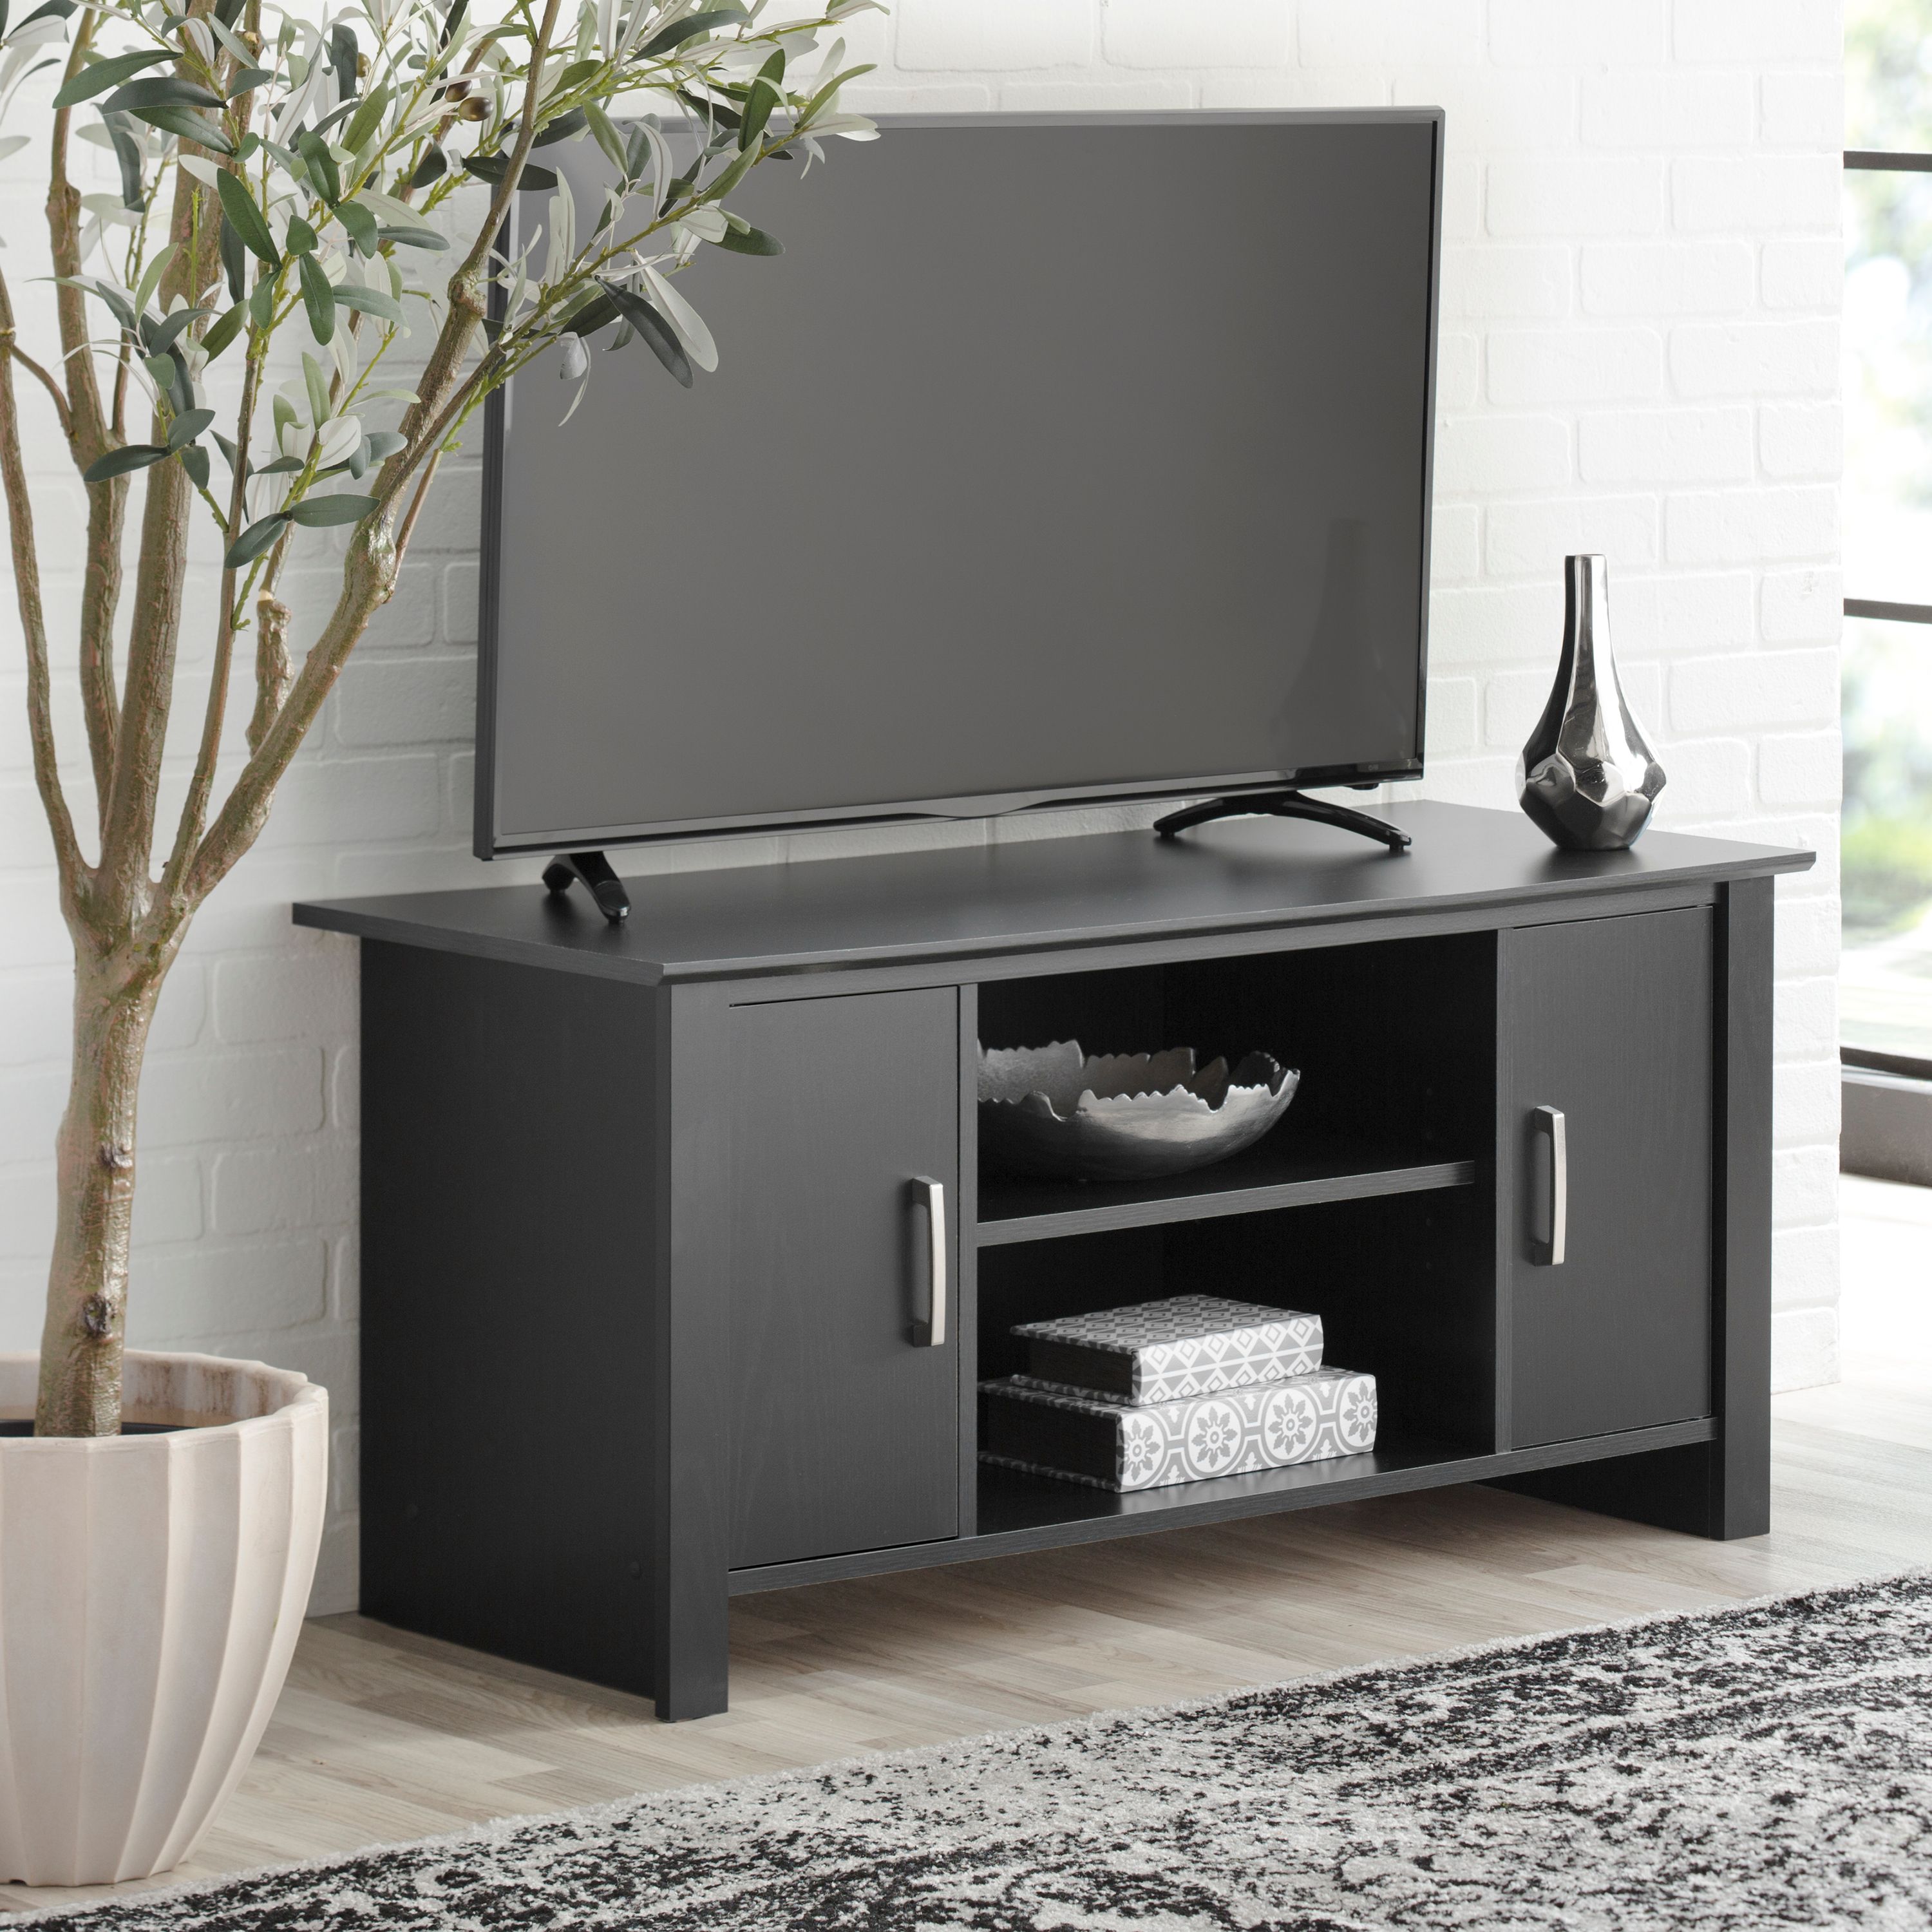 Mainstays TV Stand for Flat Screen TVs up to 47", Blackwood Finish - image 5 of 5